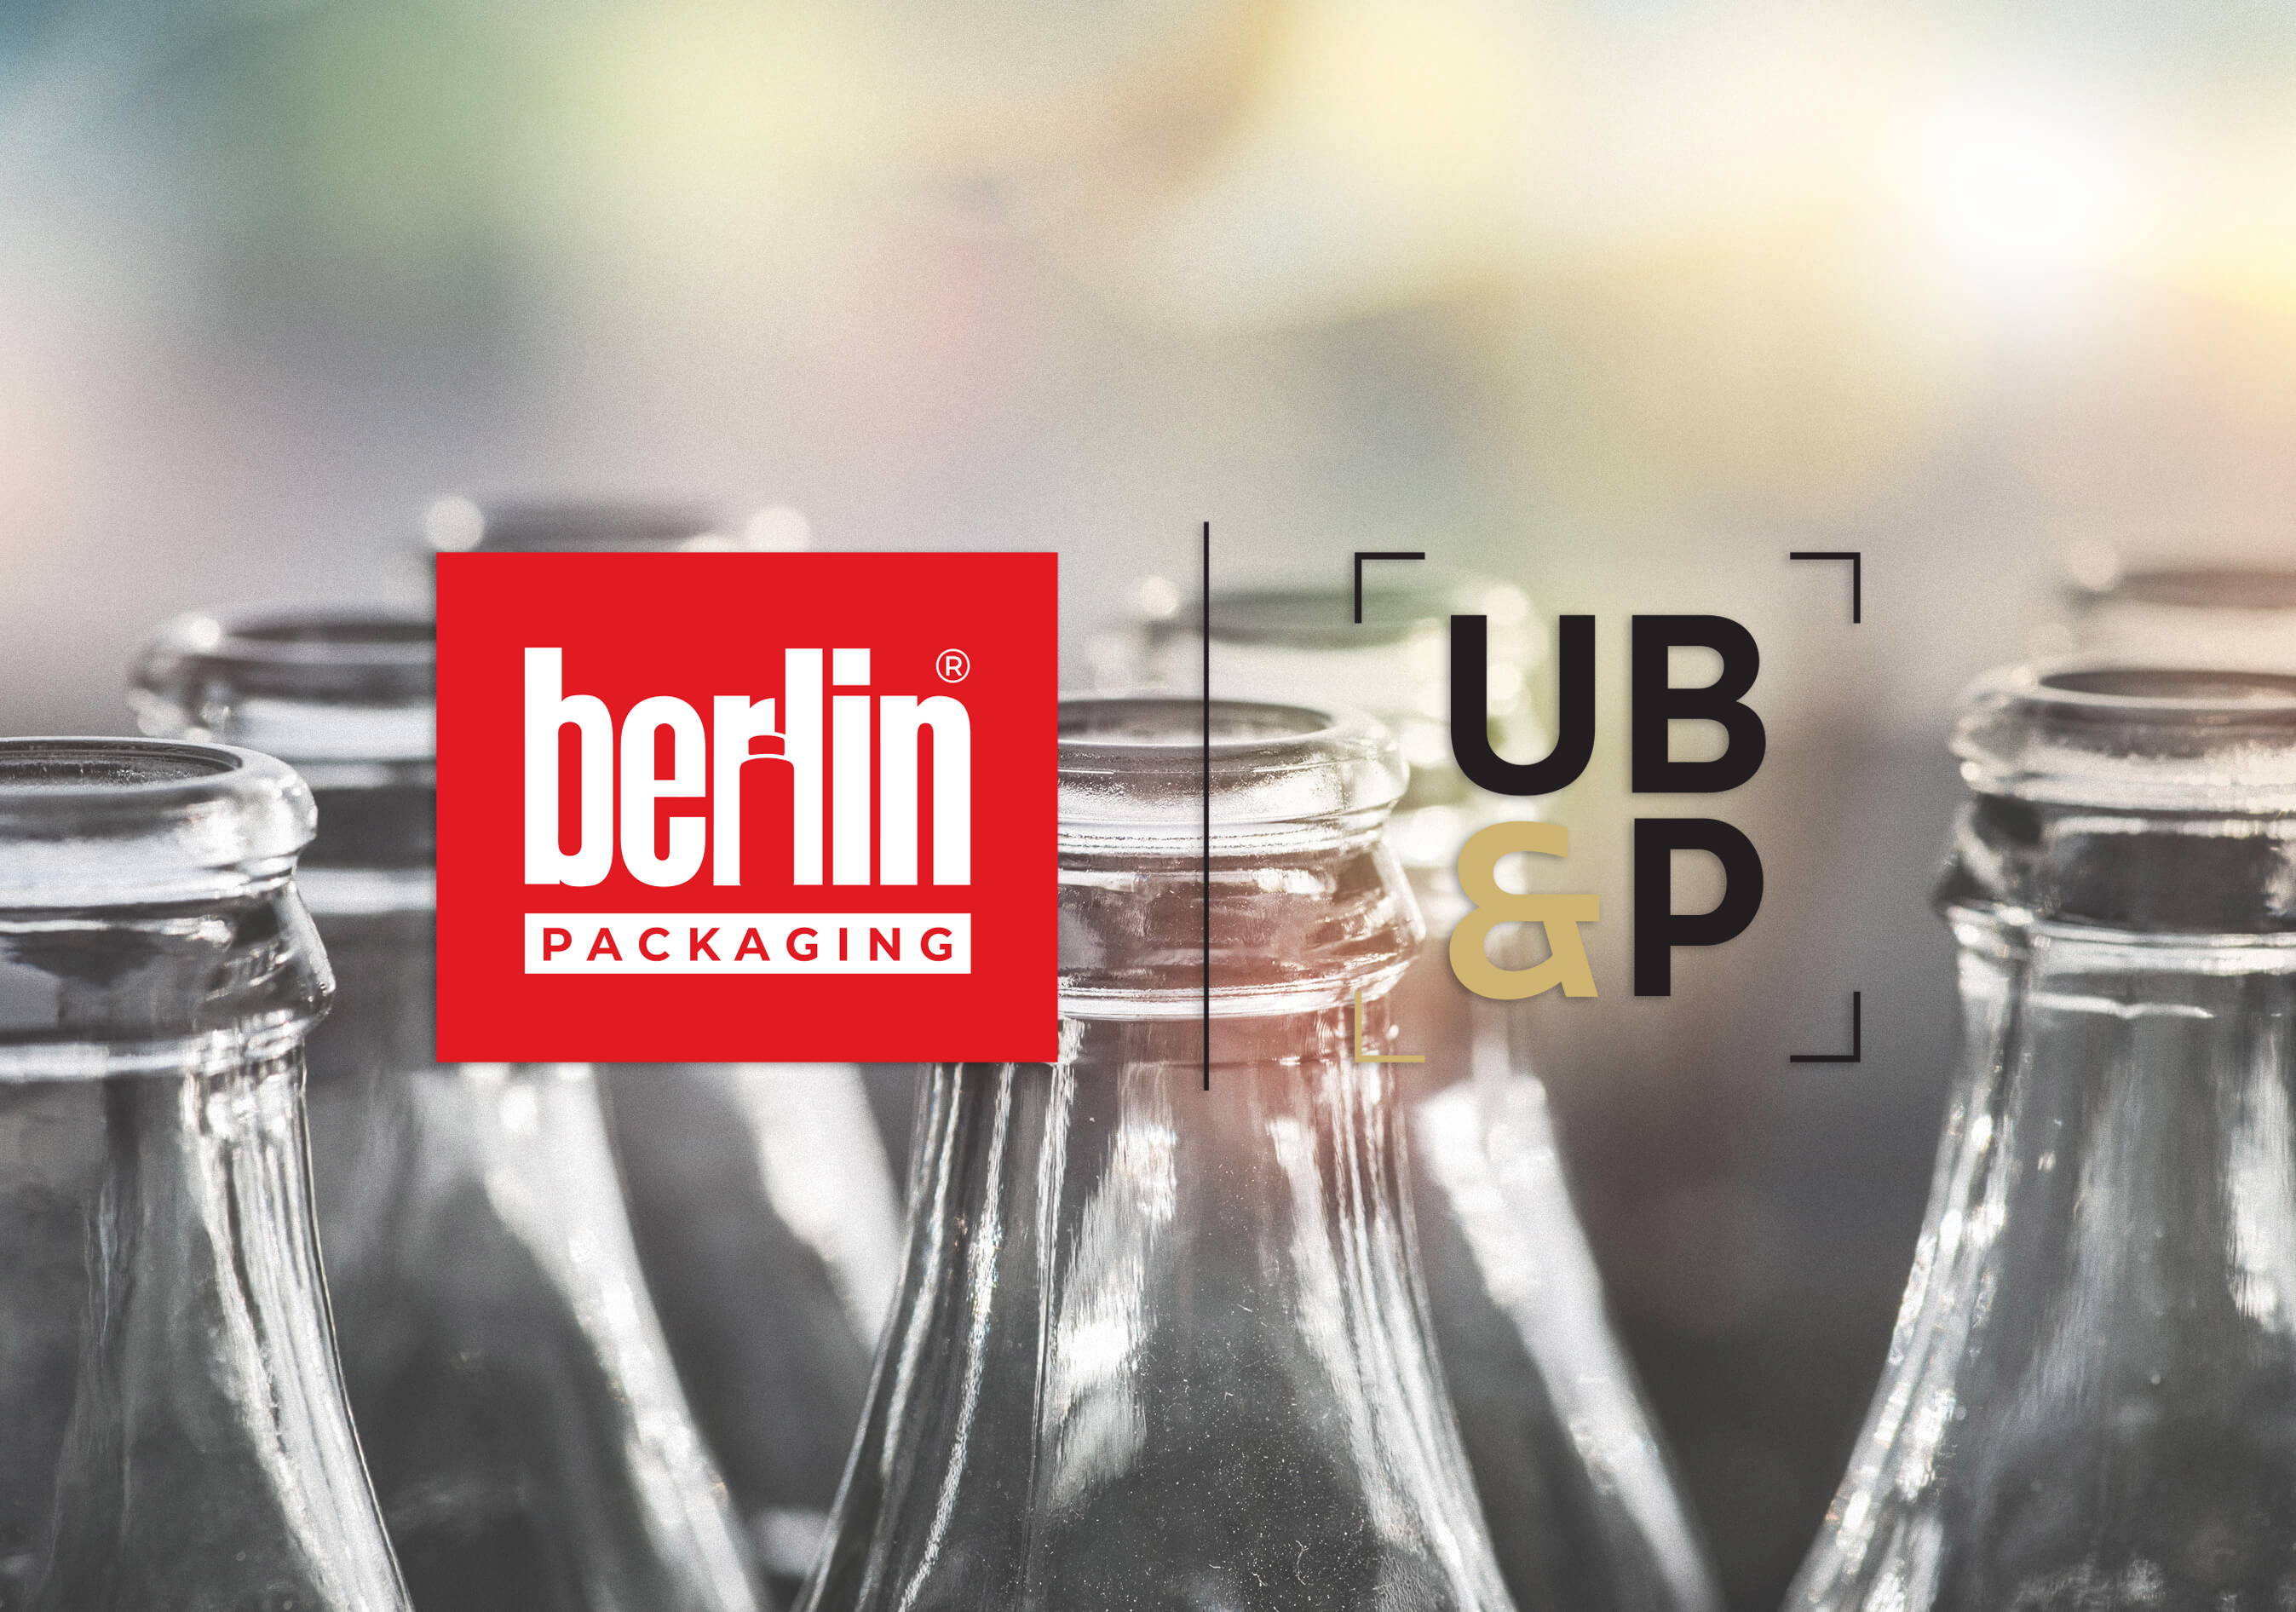 United Bottles & Packaging acquisition